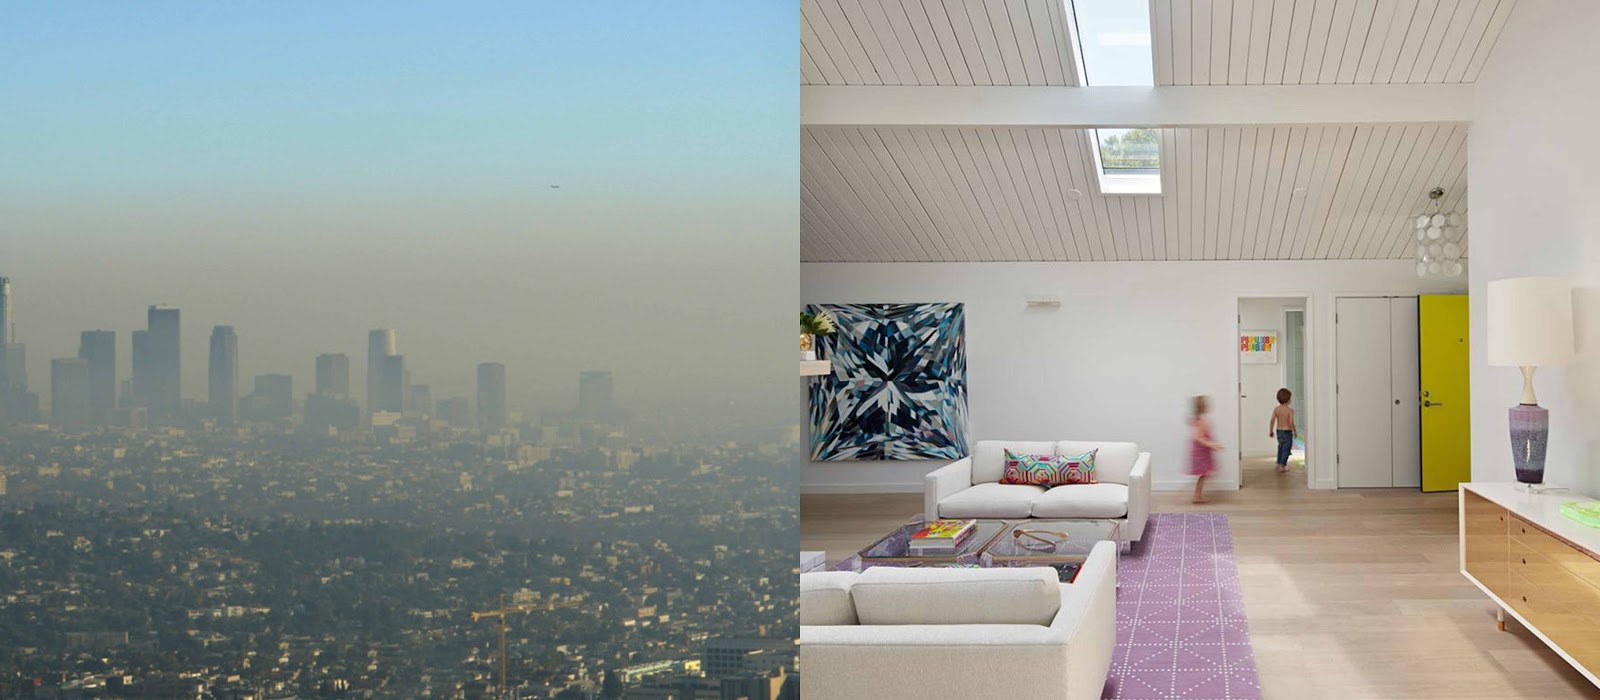 Polluted city on one half of the image and a clean indoor space on the other